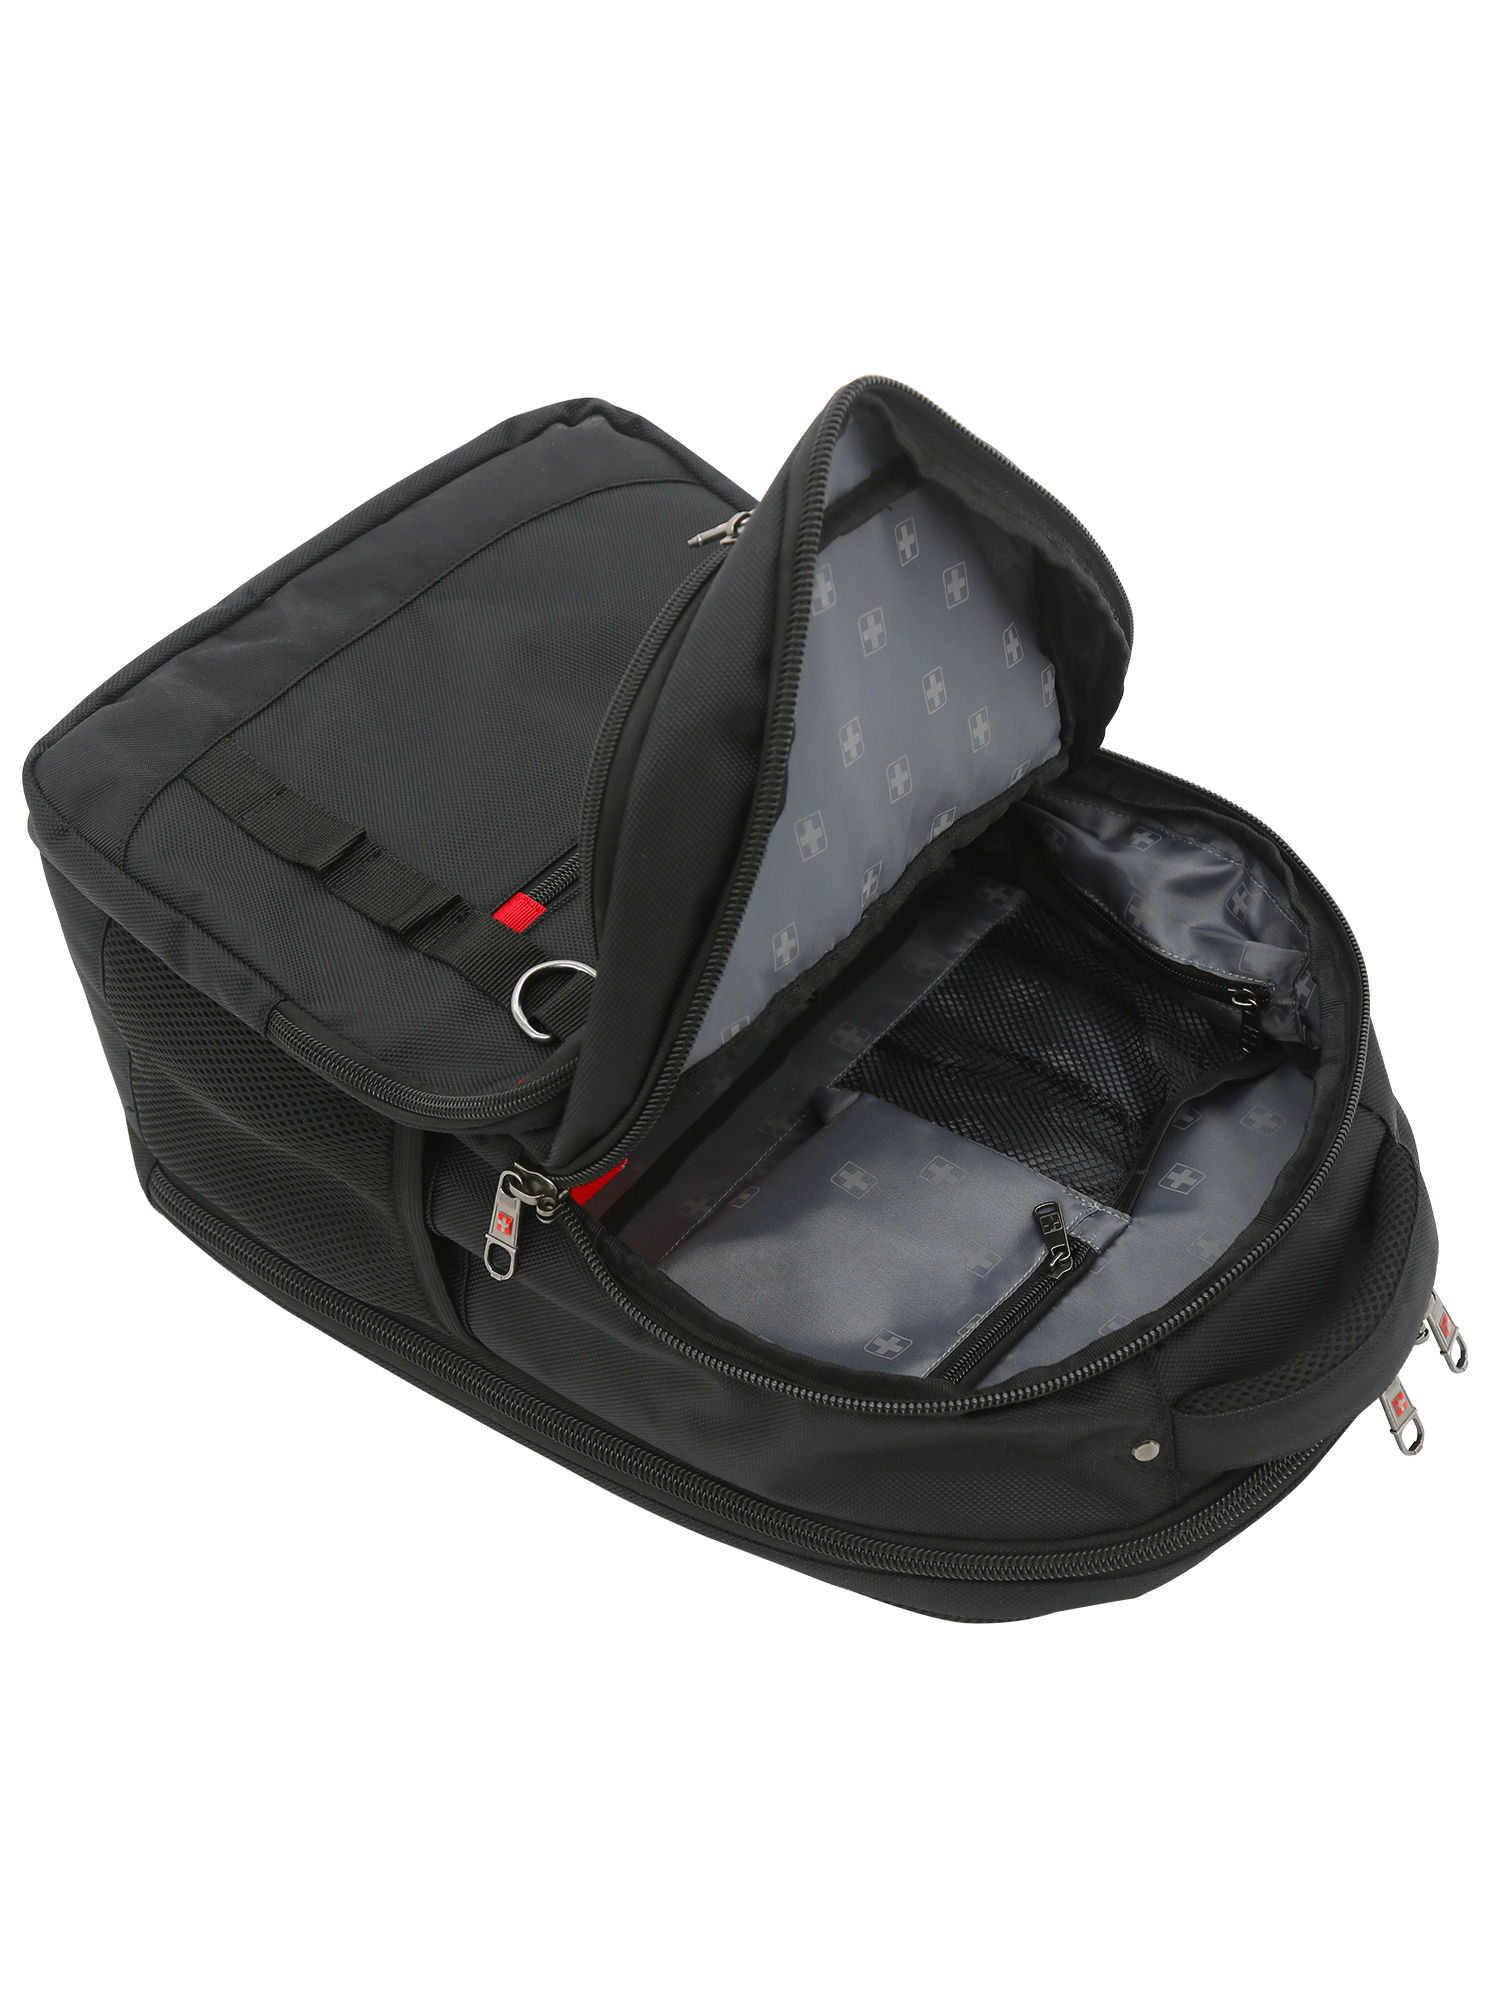 Swiss Tech Navigator Backpack with Padded Laptop Section - image 5 of 9